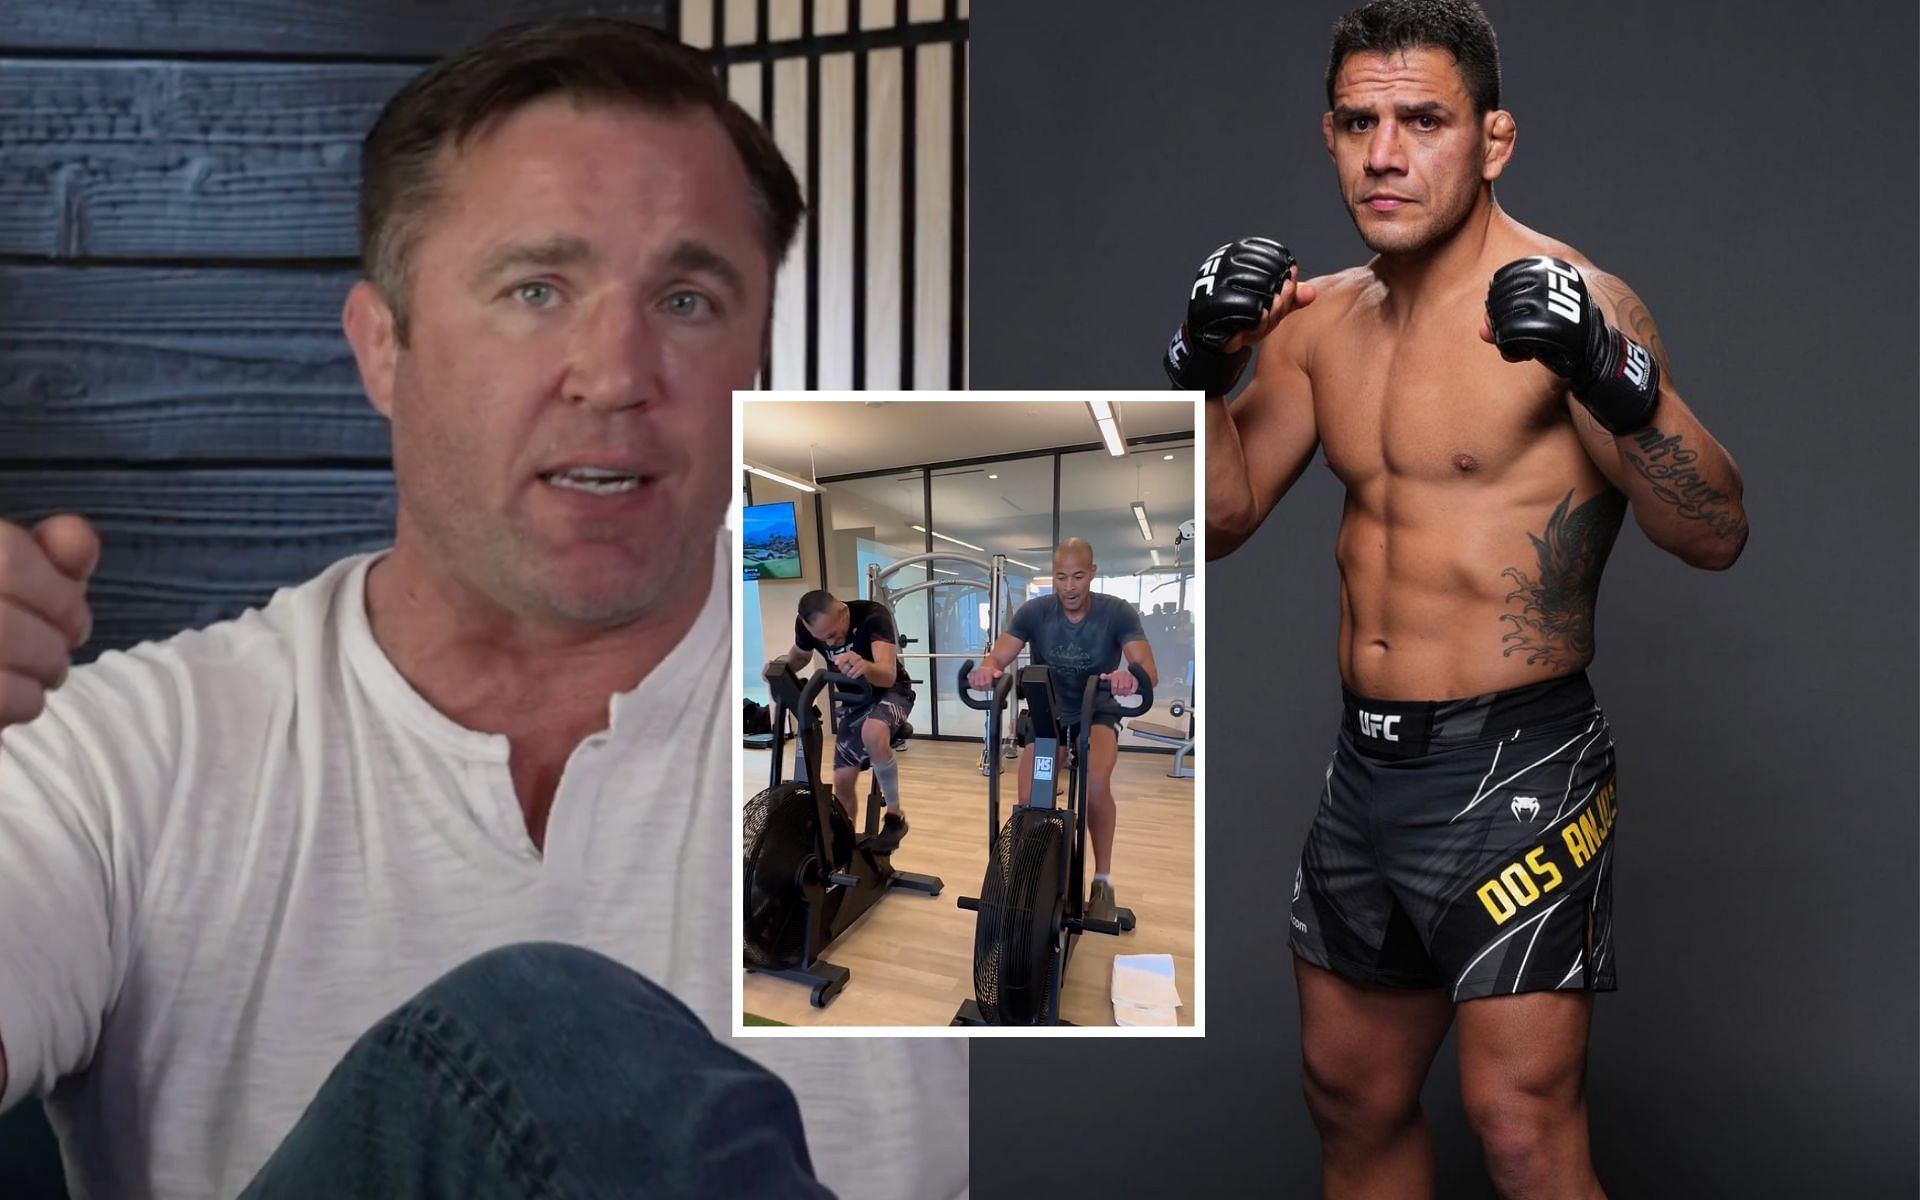 Chael Sonnen (left) and Rafael dos Anjos (right) weigh in on Tony Ferguson training with David Goggins (center) [Photo Courtesy @sonnench, @rdosanjosmma and @davidgoggins on Instagram]